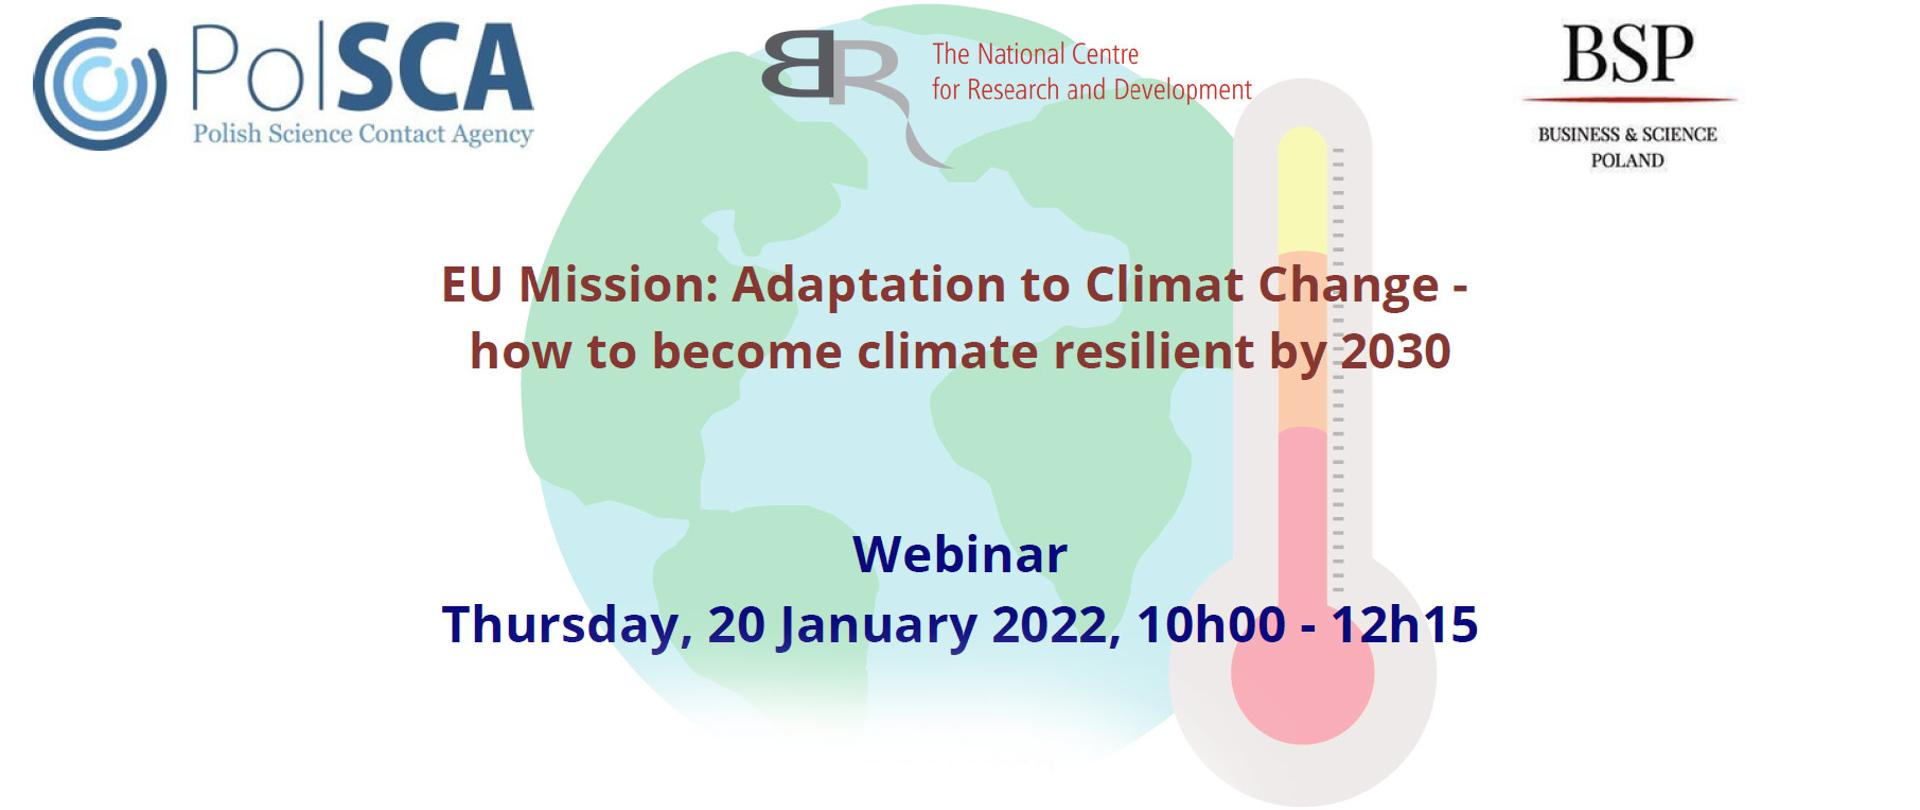 EU Mission: Adaptation to Climate Change - how to become climate resilient by 2030